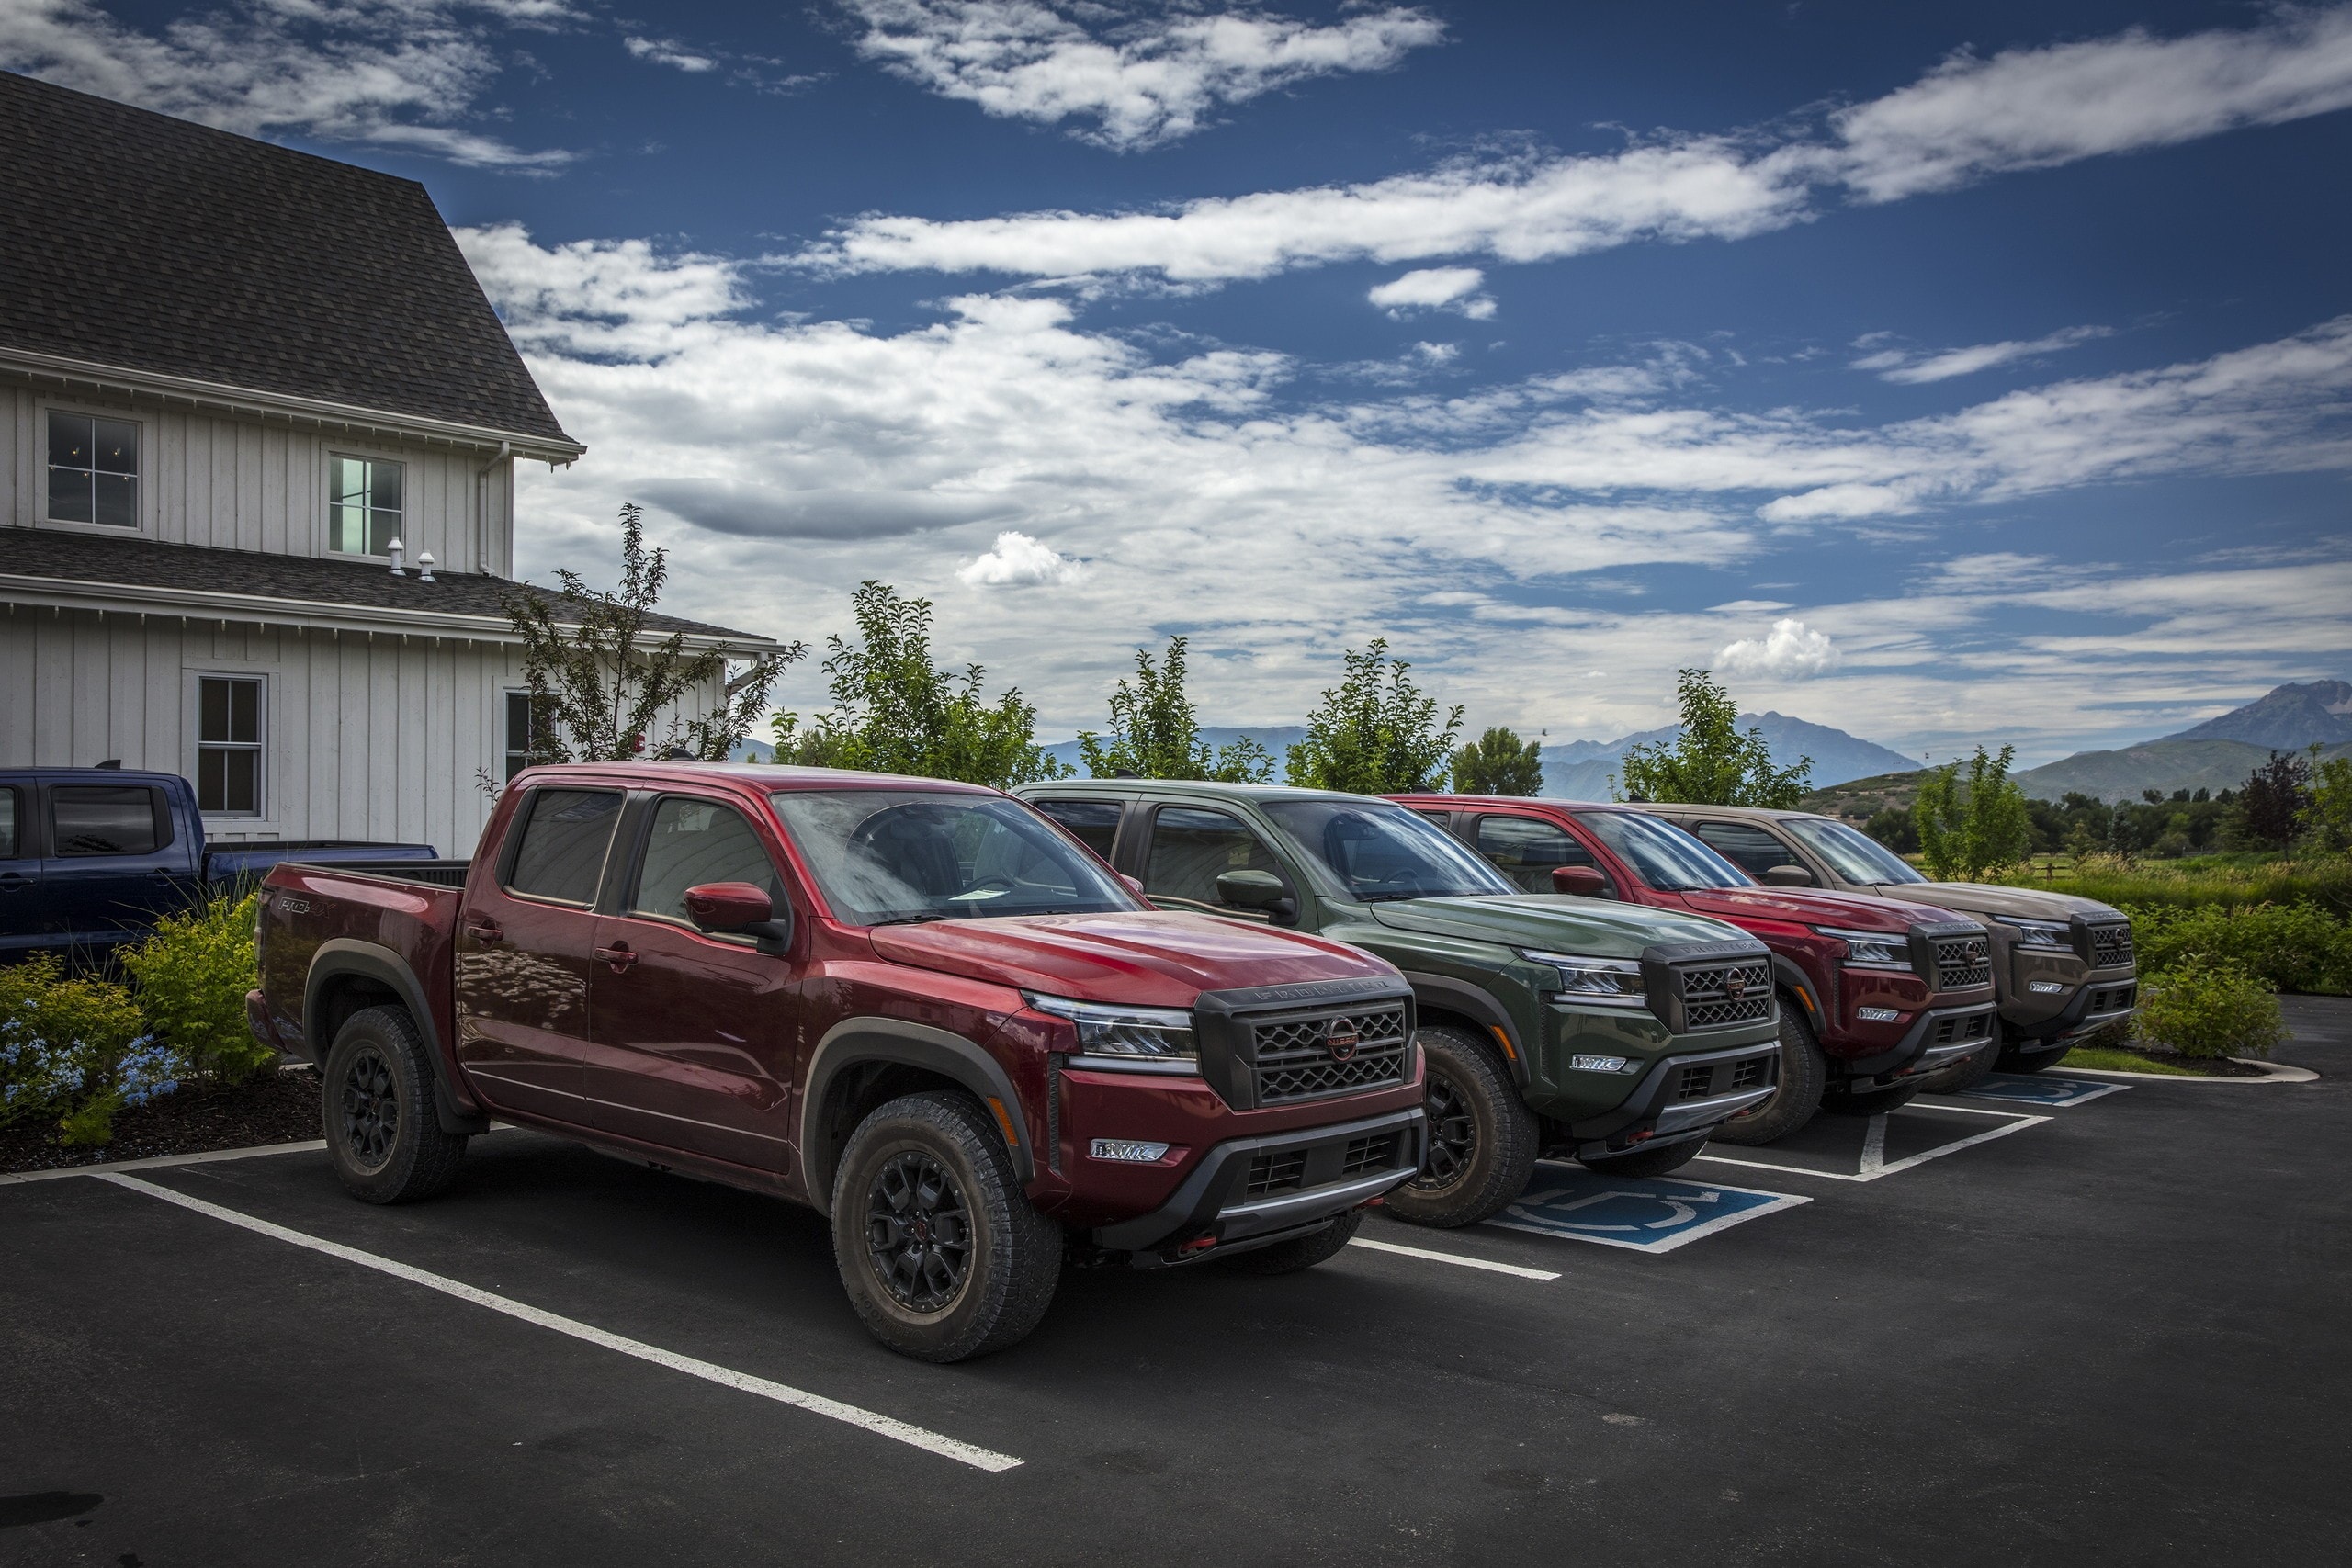 2023 Nissan Frontier Pickup Truck Pricing Announced, Midnight Edition